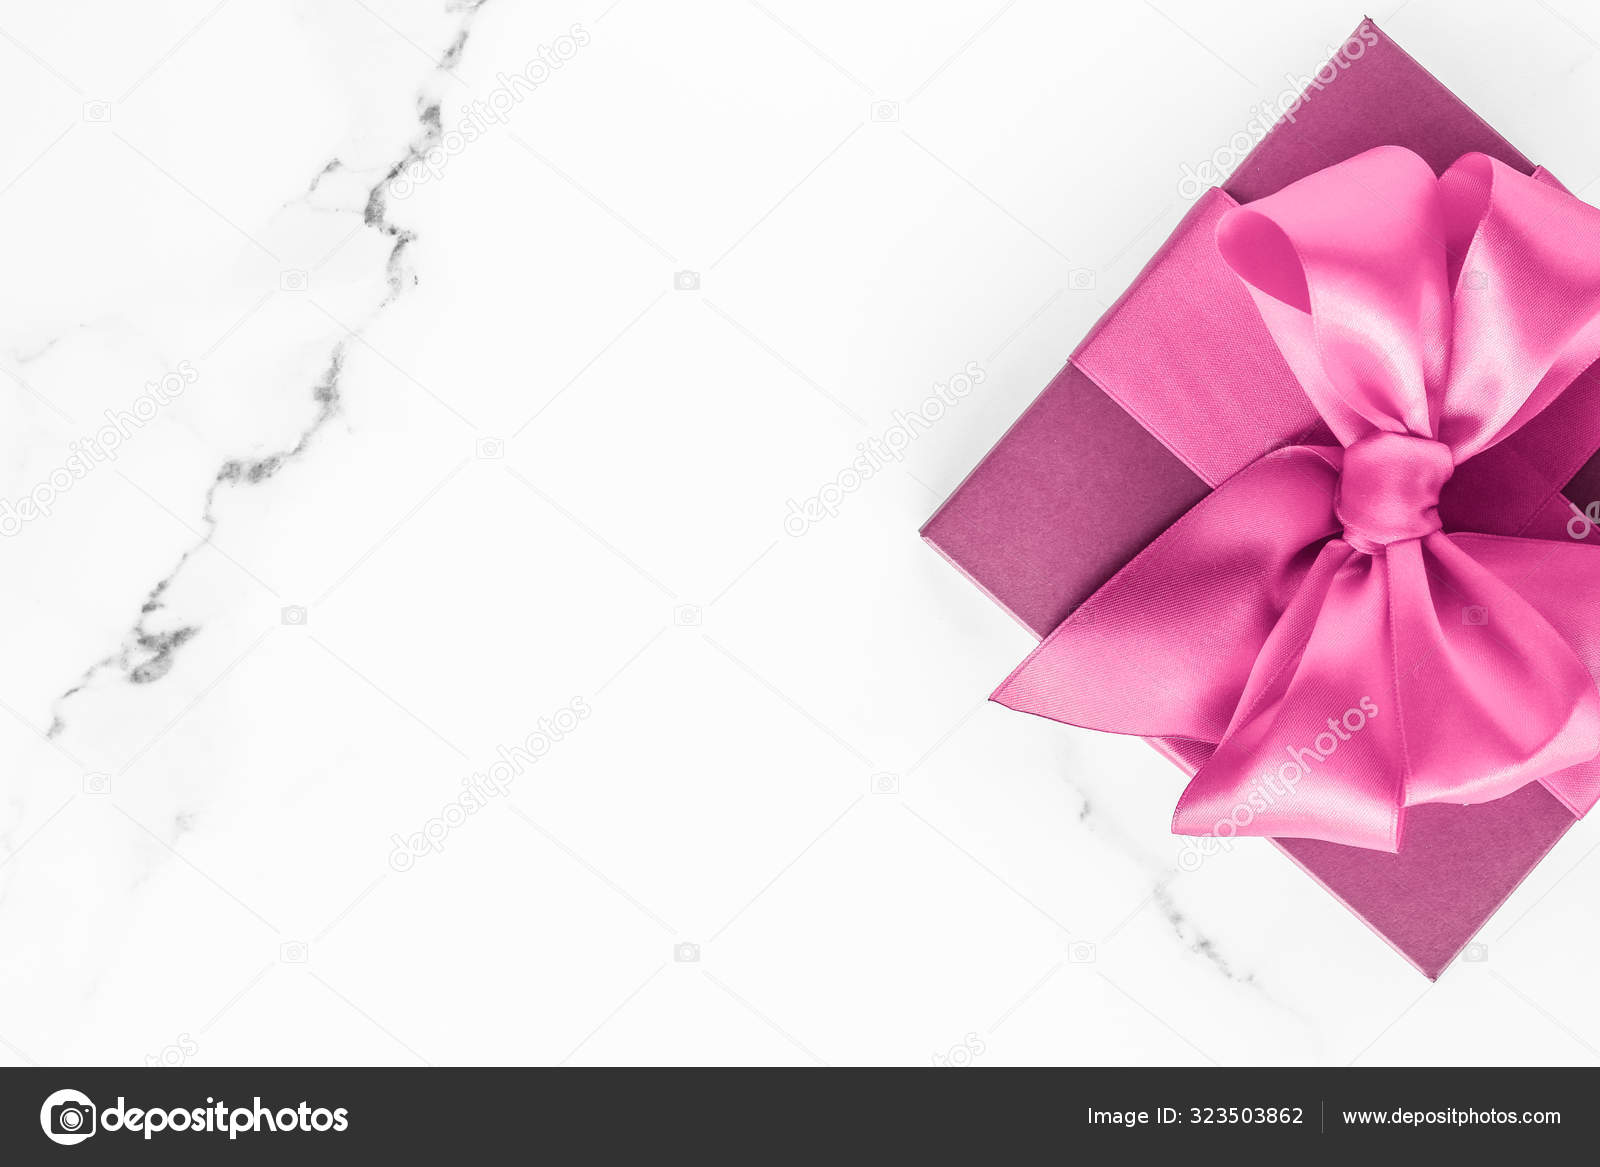 Black silk ribbon and bow on marble background, flatlay, Stock image